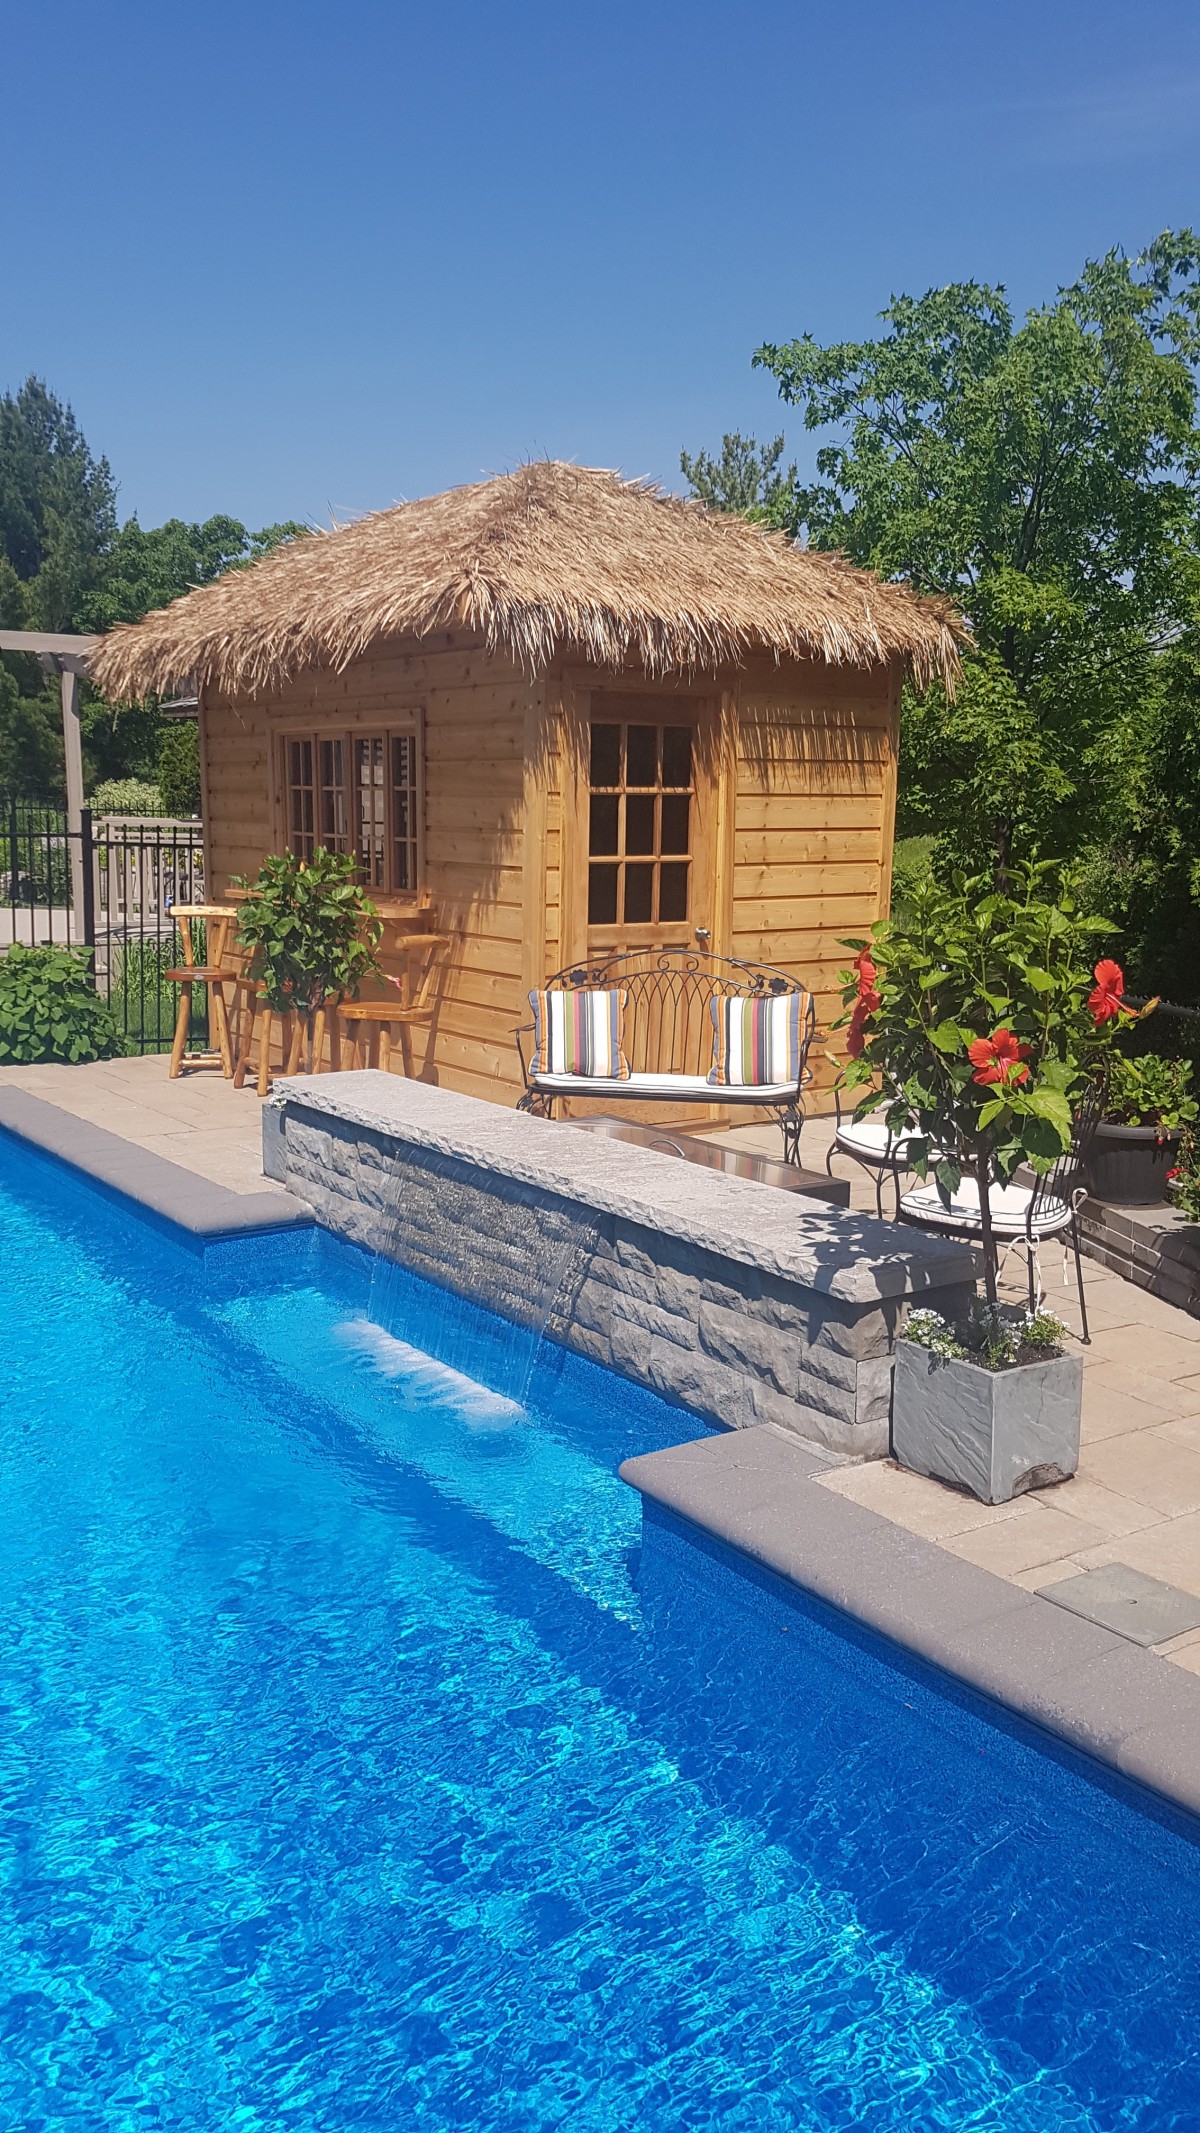 Sonoma pool cabana idea 7x12 with rough cedar channel siding seen from the right1. ID number